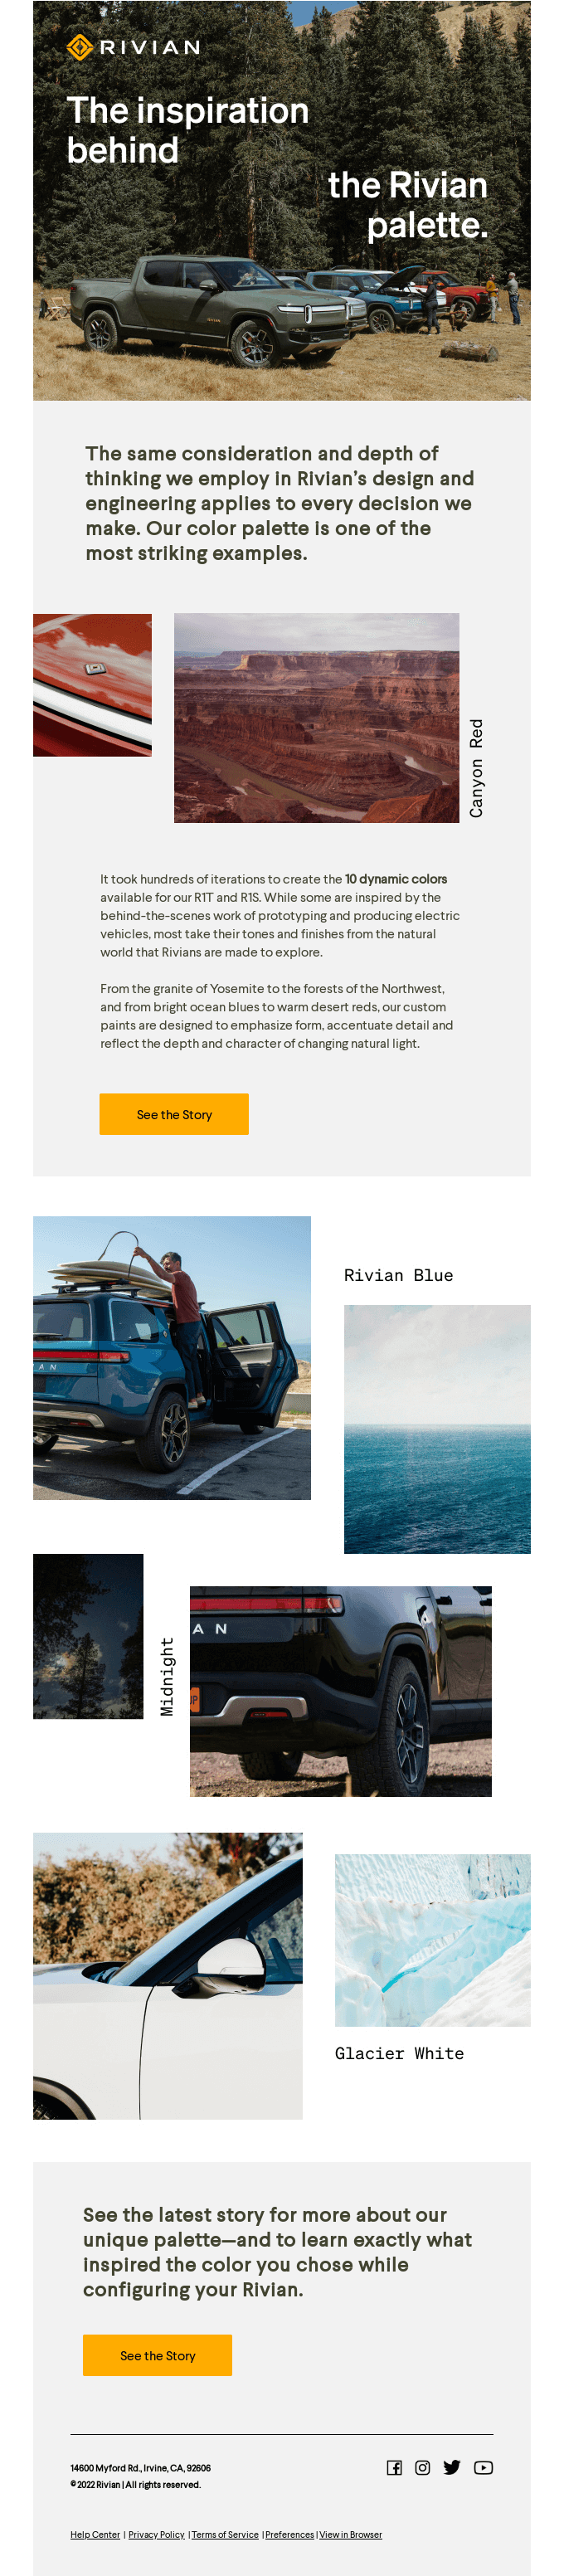 How Nature Inspired Rivian’s Colors